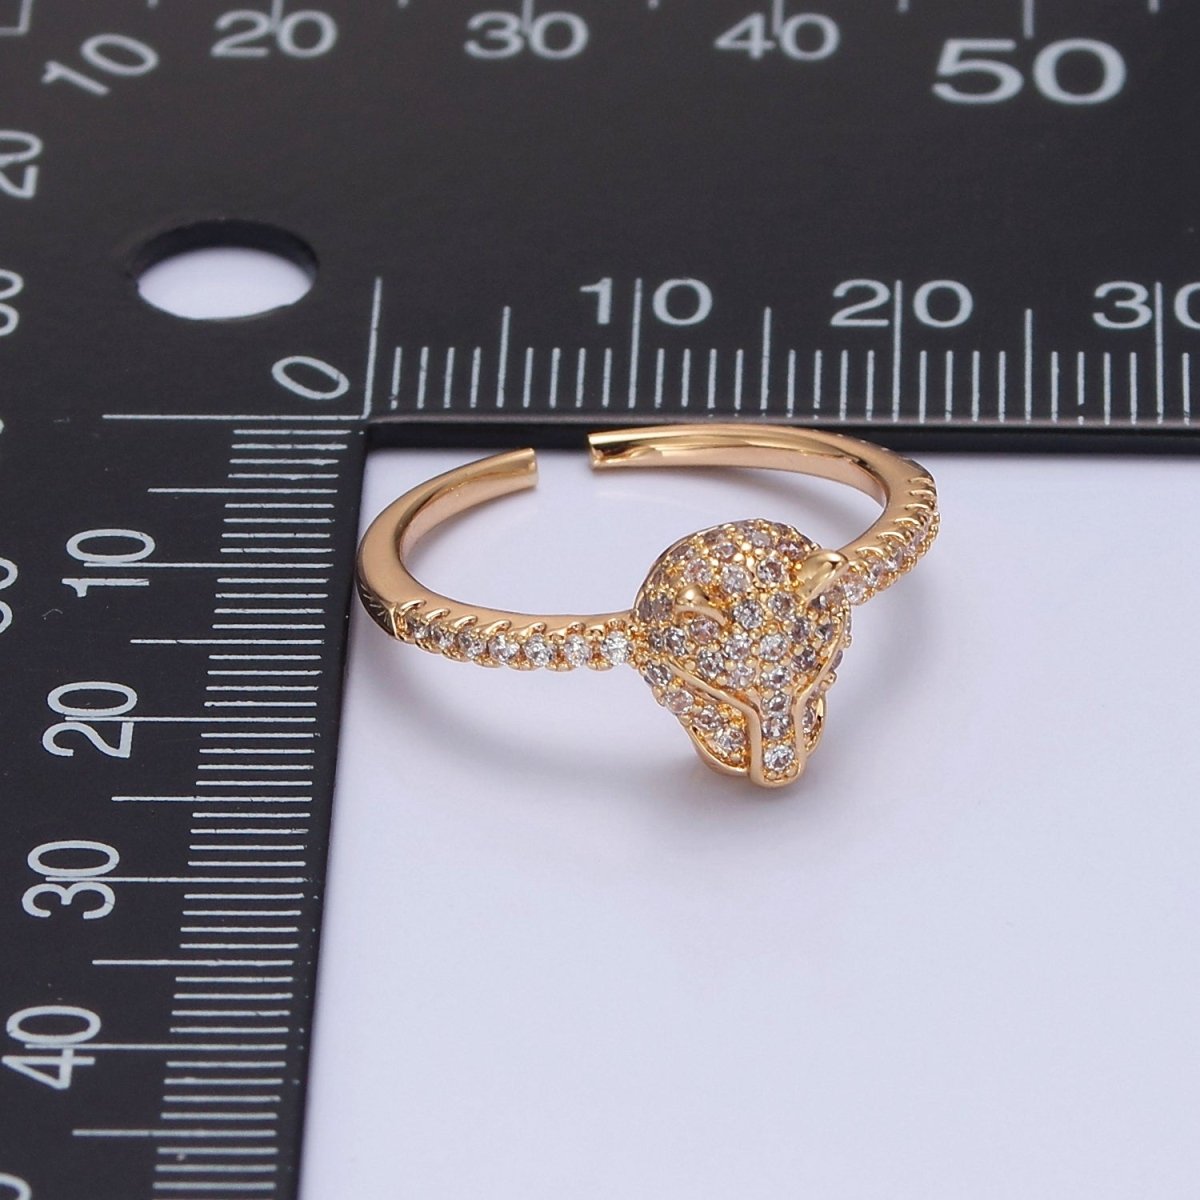 Gold Leopard Ring, Danity Panther Ring, Cat, Cheetah Ring Animal Jewelry O-2145 - DLUXCA